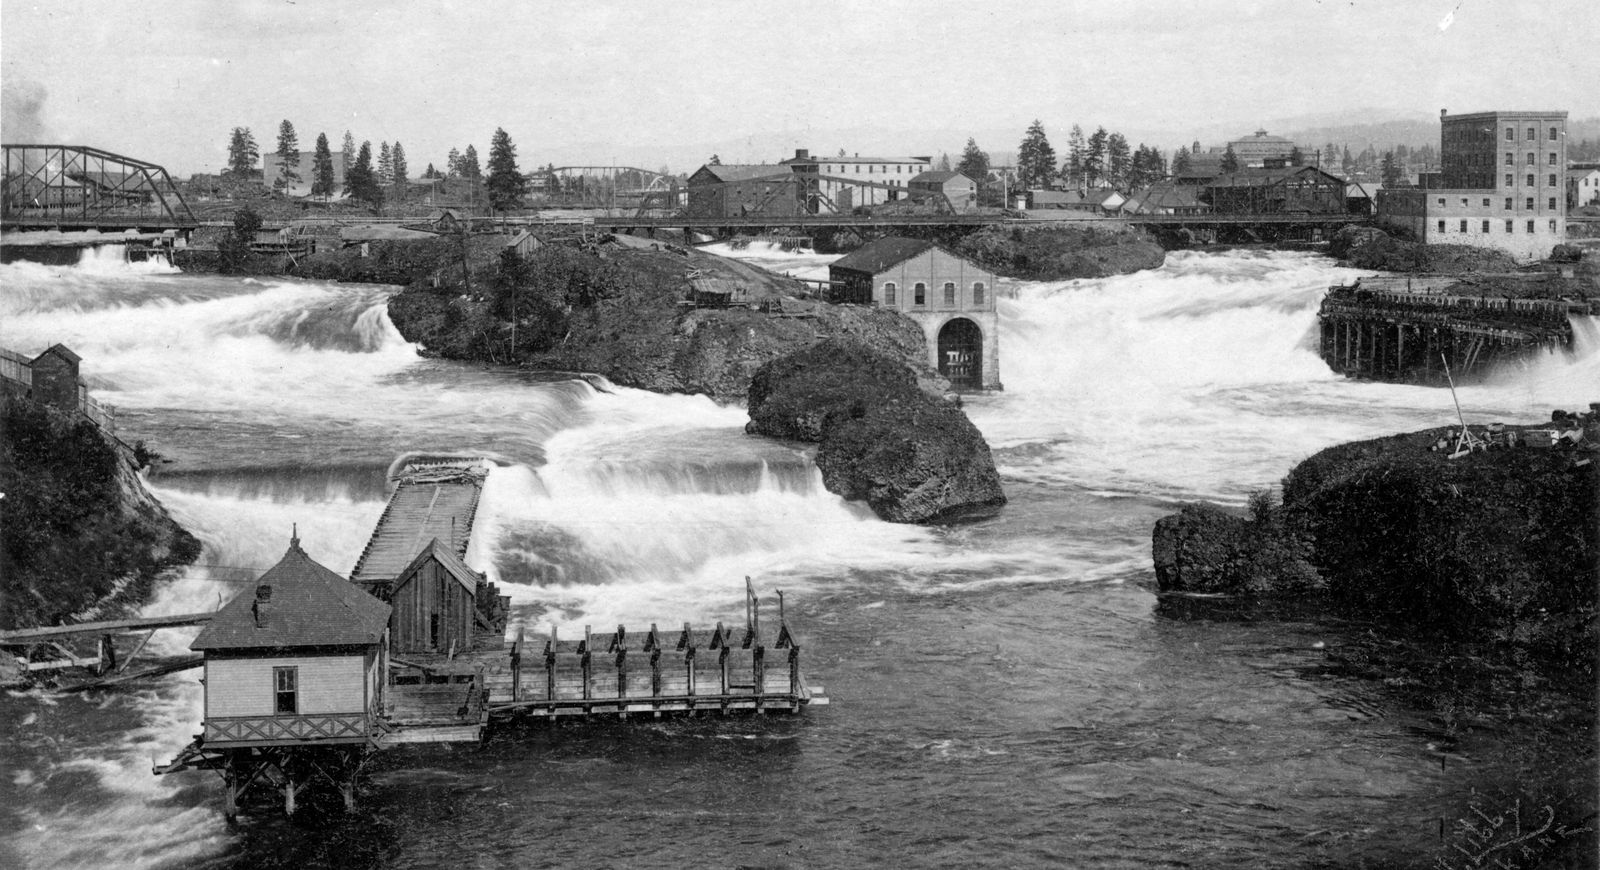 Then & Now Gallery Spokane Middle Falls April 9, 2012 The